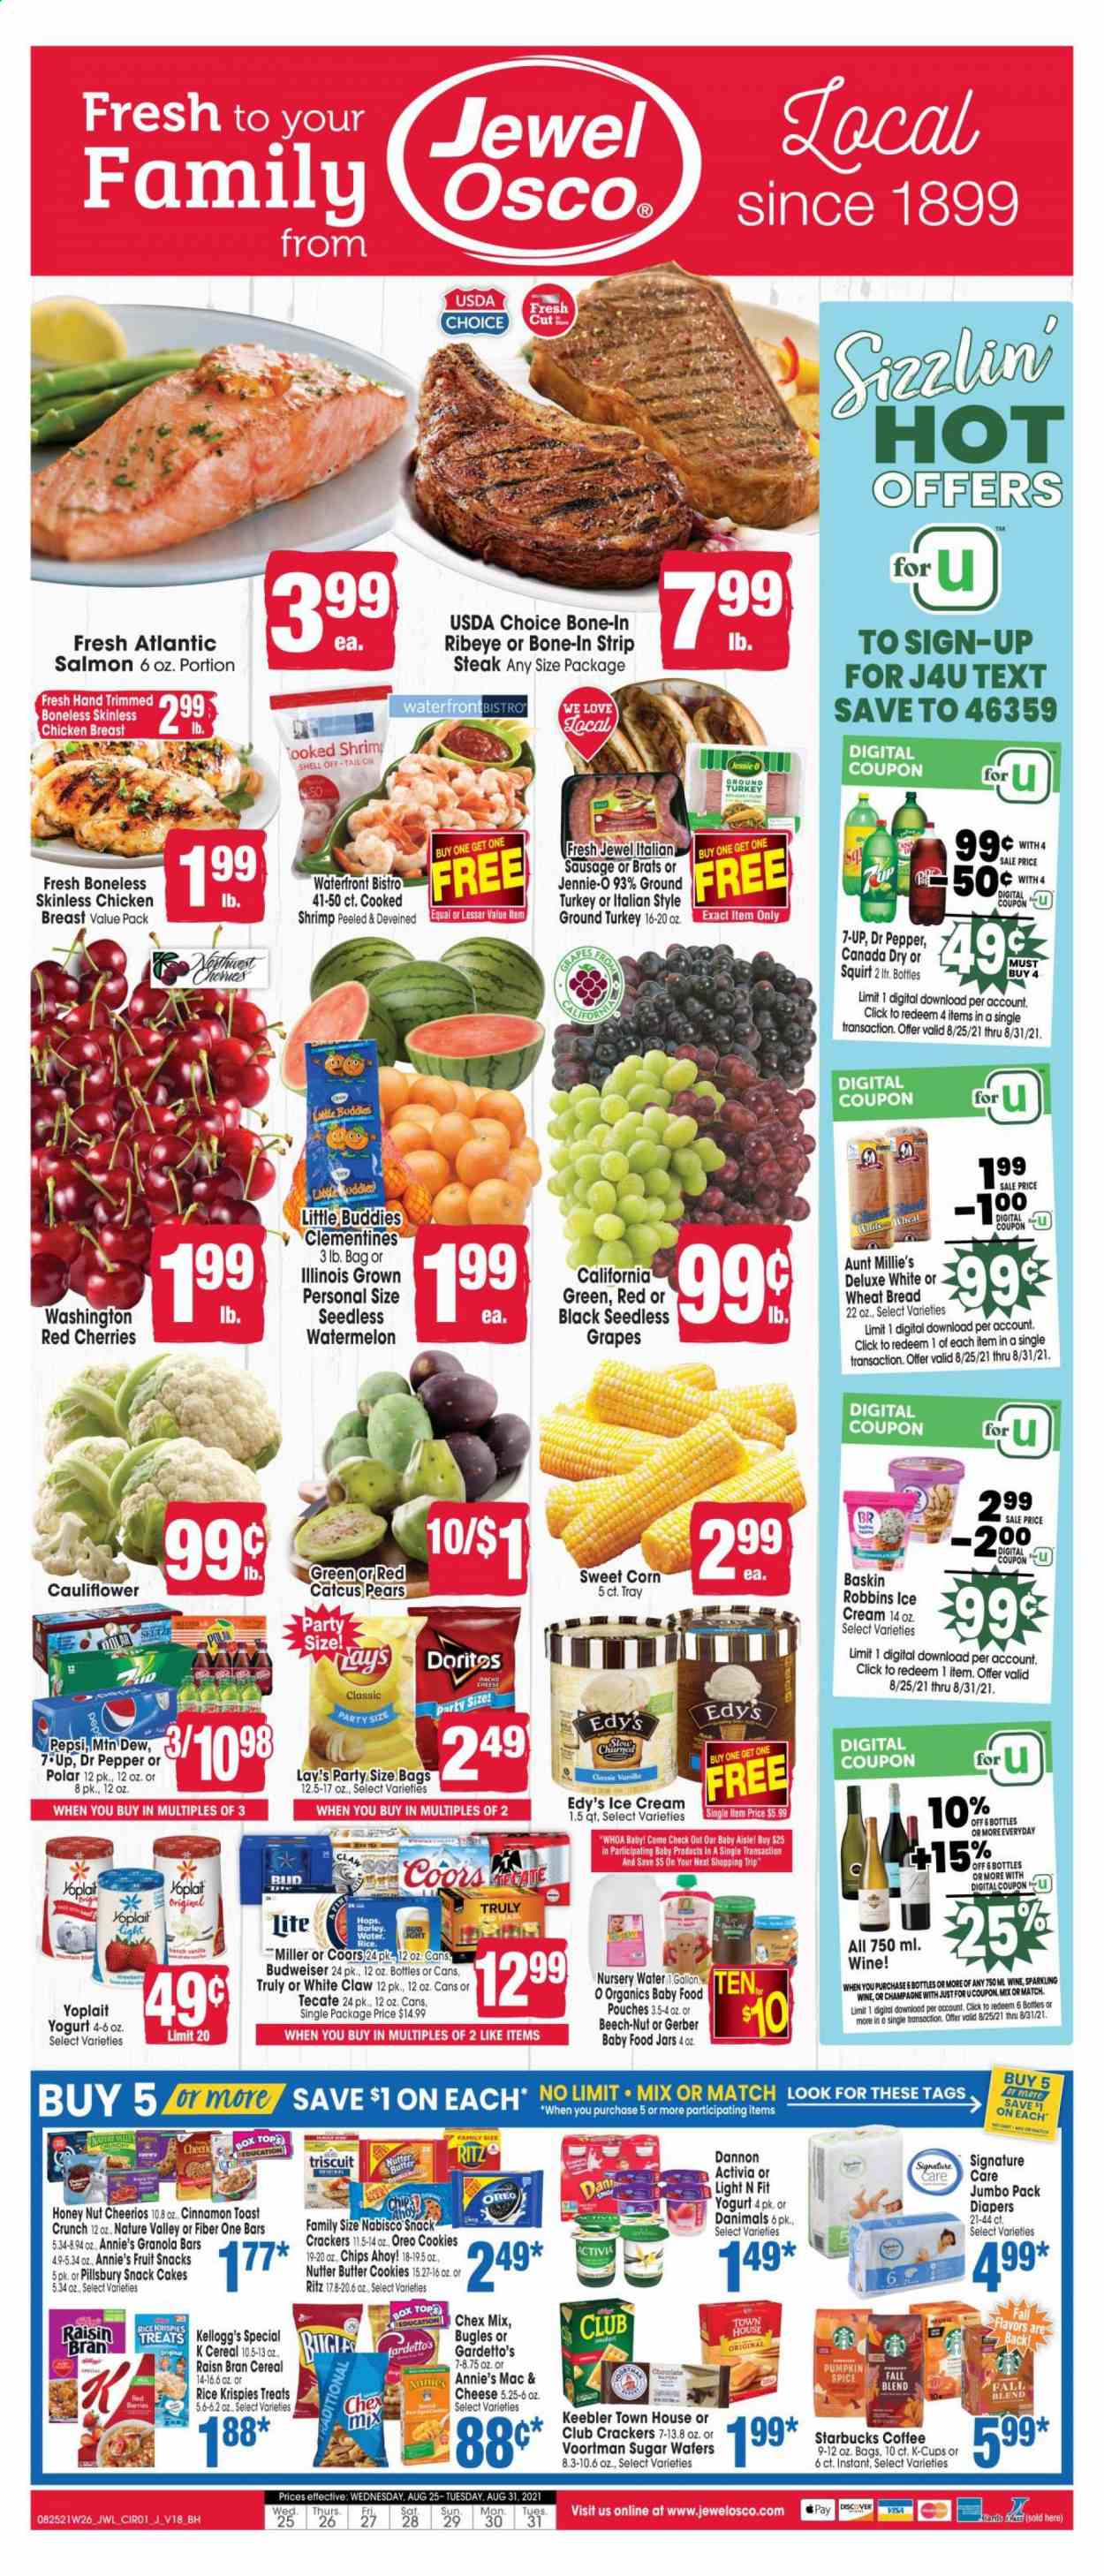 thumbnail - Jewel Osco Flyer - 08/25/2021 - 08/31/2021 - Sales products - seedless grapes, wheat bread, cake, corn, sweet corn, watermelon, cherries, pears, salmon, shrimps, Pillsbury, Annie's, sausage, italian sausage, Oreo, yoghurt, Activia, Yoplait, Dannon, Danimals, ice cream, cookies, wafers, butter cookies, crackers, Kellogg's, fruit snack, Chips Ahoy!, Keebler, RITZ, Doritos, Gerber, chips, Lay’s, Chex Mix, cereals, Cheerios, granola bar, Rice Krispies, Raisin Bran, Nature Valley, Fiber One, spice, cinnamon, Canada Dry, Mountain Dew, Pepsi, ice tea, Dr. Pepper, 7UP, coffee, Starbucks, coffee capsules, K-Cups, sparkling wine, champagne, wine, White Claw, TRULY, beer, Bud Light, Miller, ground turkey, chicken breasts, beef meat, steak, bone-in ribeye, striploin steak, nappies, jar, Budweiser, clementines, Coors. Page 1.